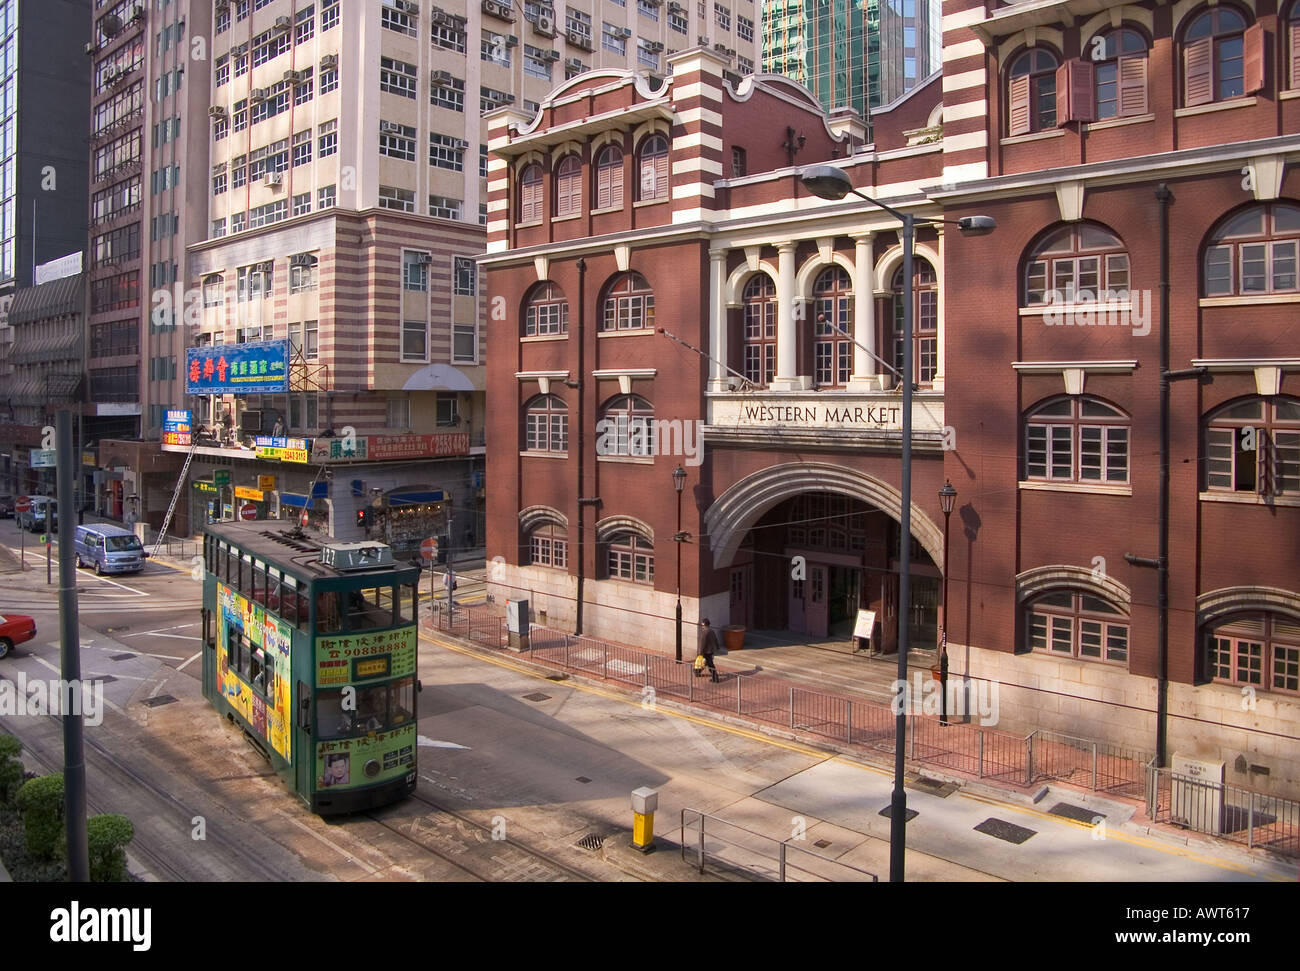 dh Western Market SHEUNG WAN HONG KONG Front green tram Connaught Road West old city district island public transport Stock Photo